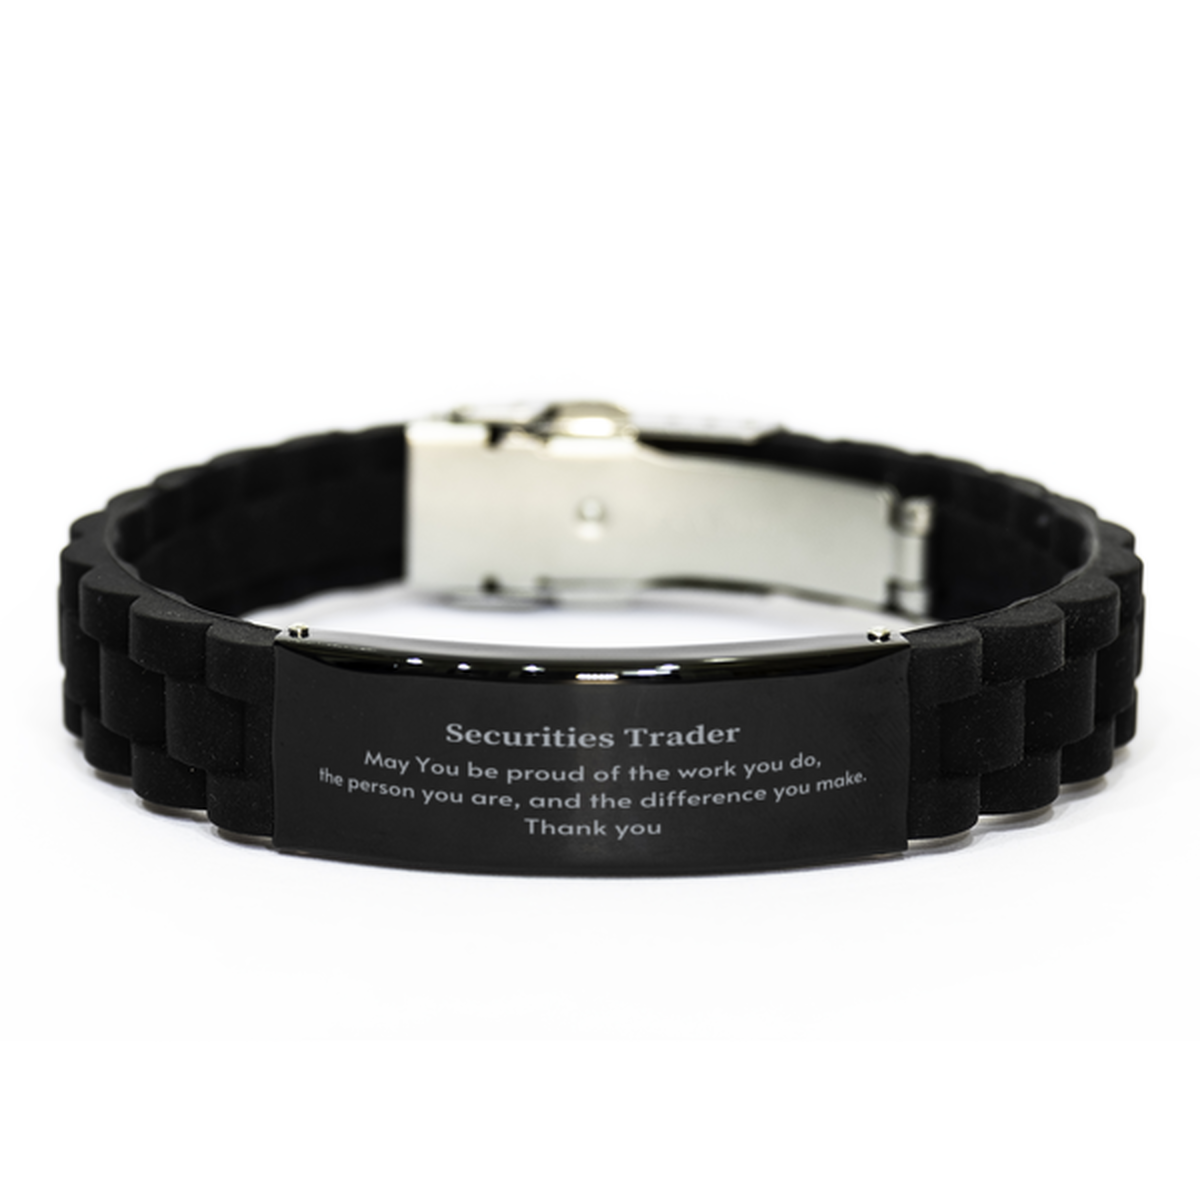 Heartwarming Black Glidelock Clasp Bracelet Retirement Coworkers Gifts for Securities Trader, Securities Trader May You be proud of the work you do, the person you are Gifts for Boss Men Women Friends